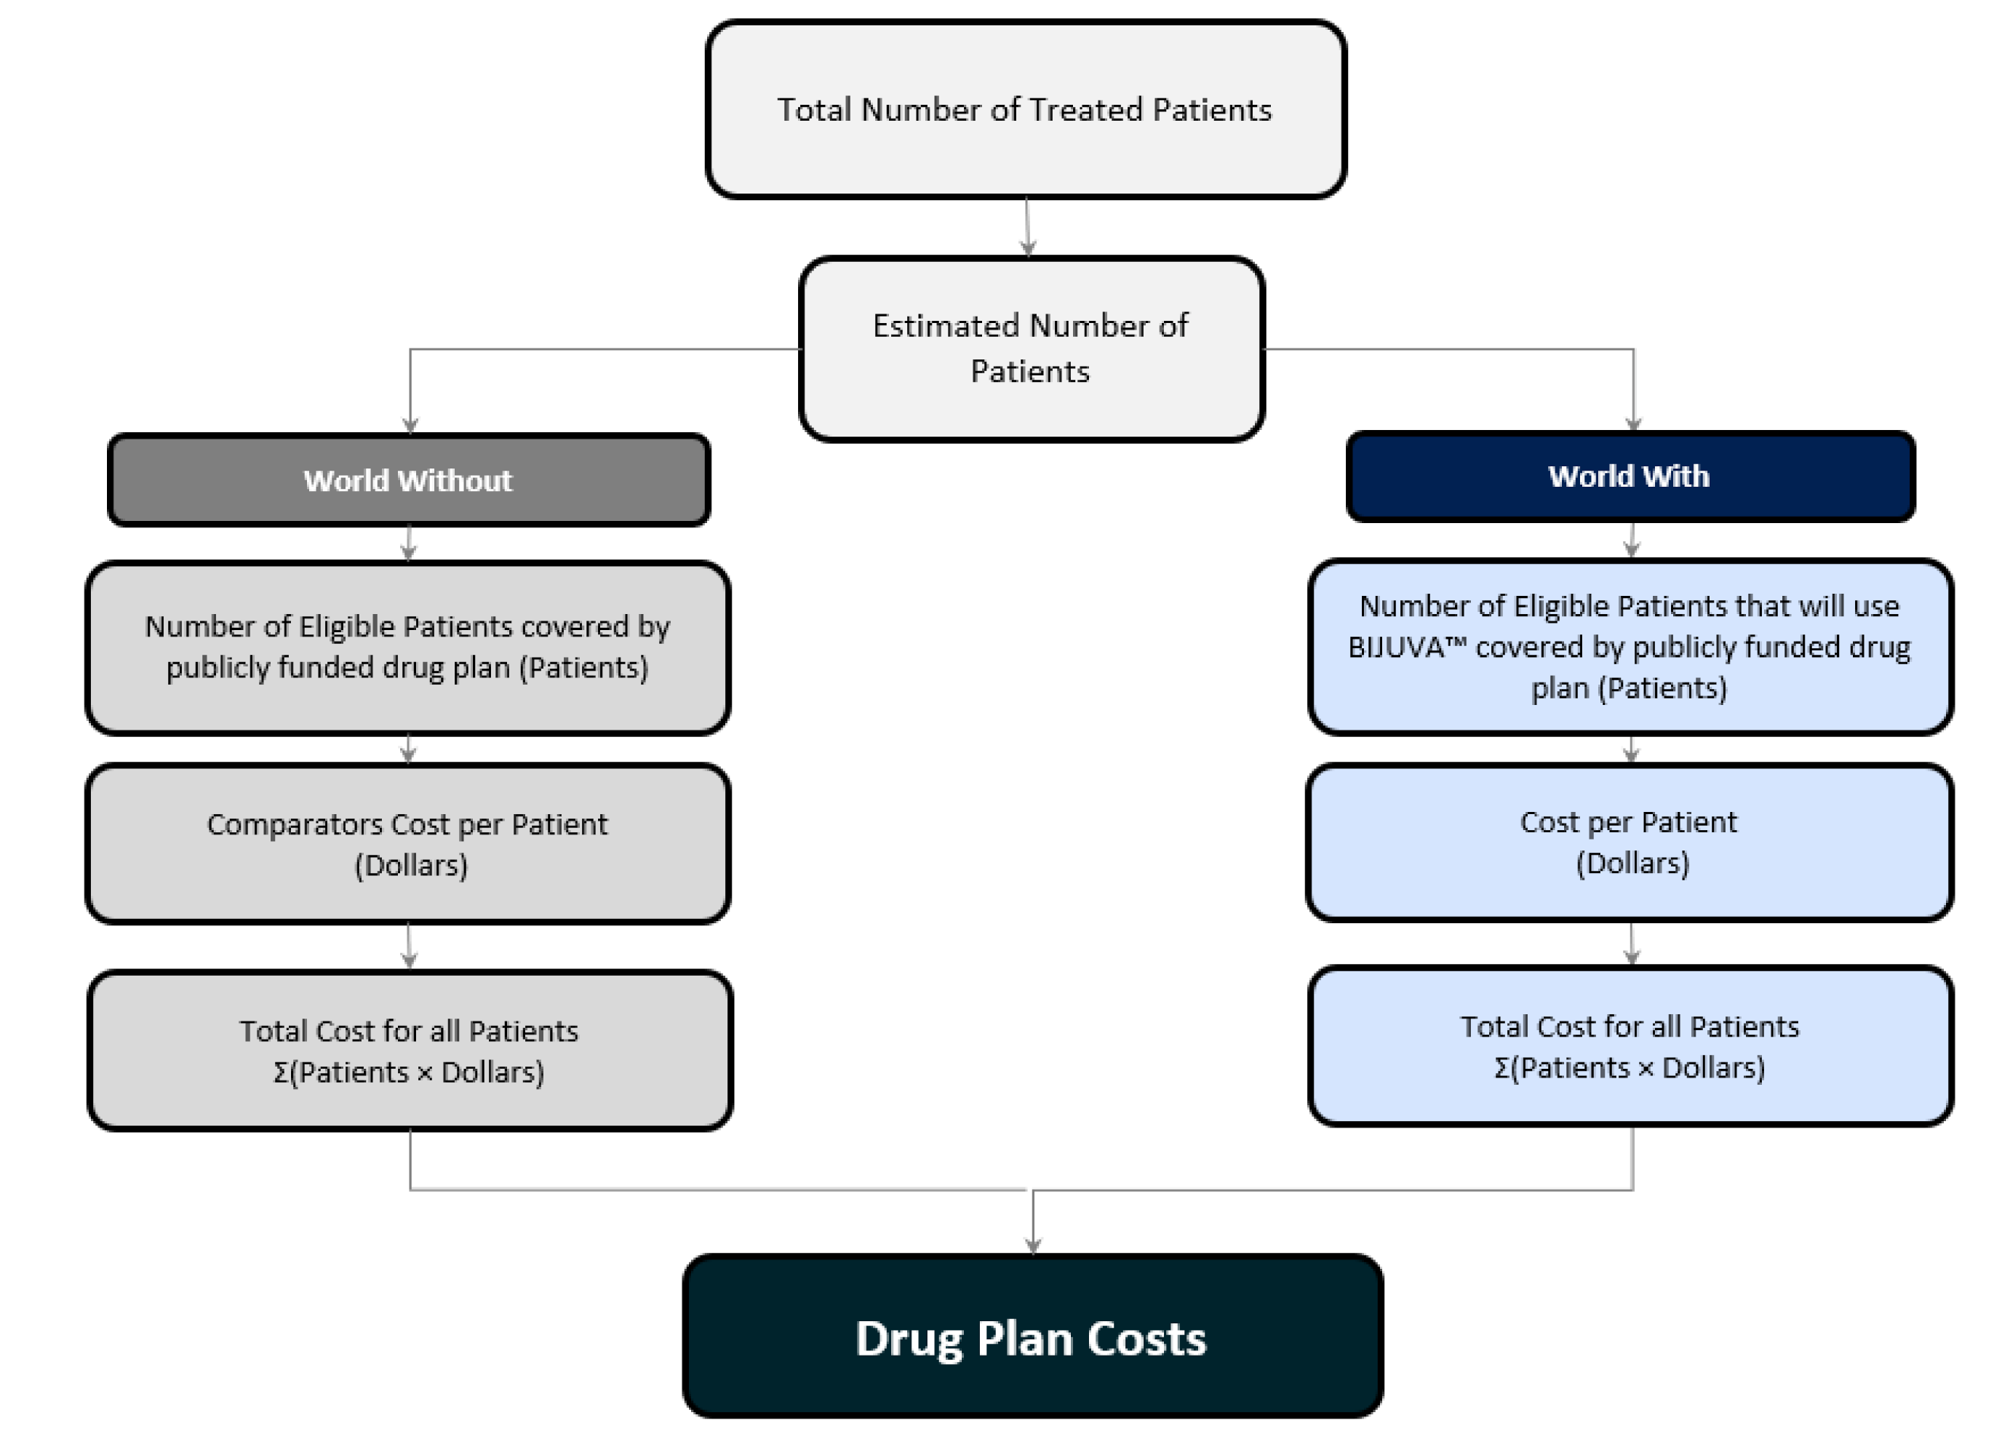 Schematic of the sponsor’s approach to estimating the anticipated budget impact of estradiol-progesterone, beginning with the total number of treated patients, and determining the total cost for all patients in a world with and a world without estradiol-progesterone. The difference in costs from these two scenarios represents the anticipated drug plan costs of reimbursing estradiol-progesterone.